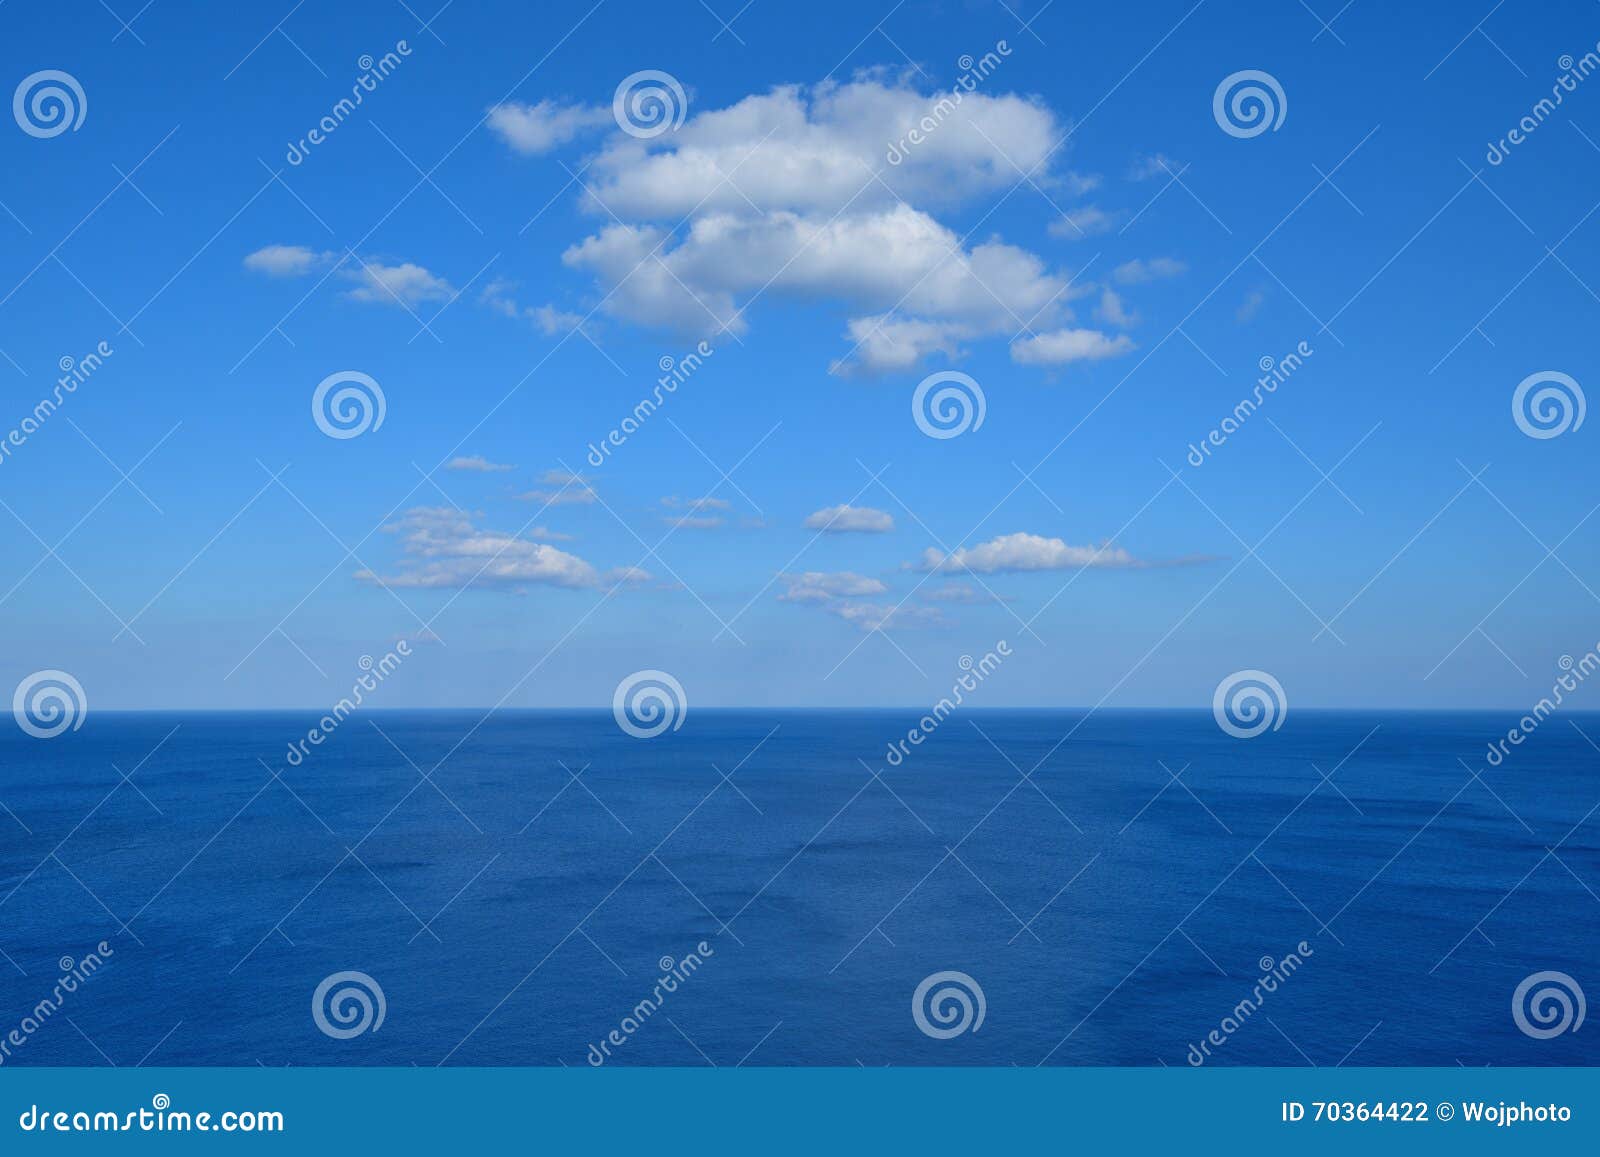 vast deep blue sea with clouds